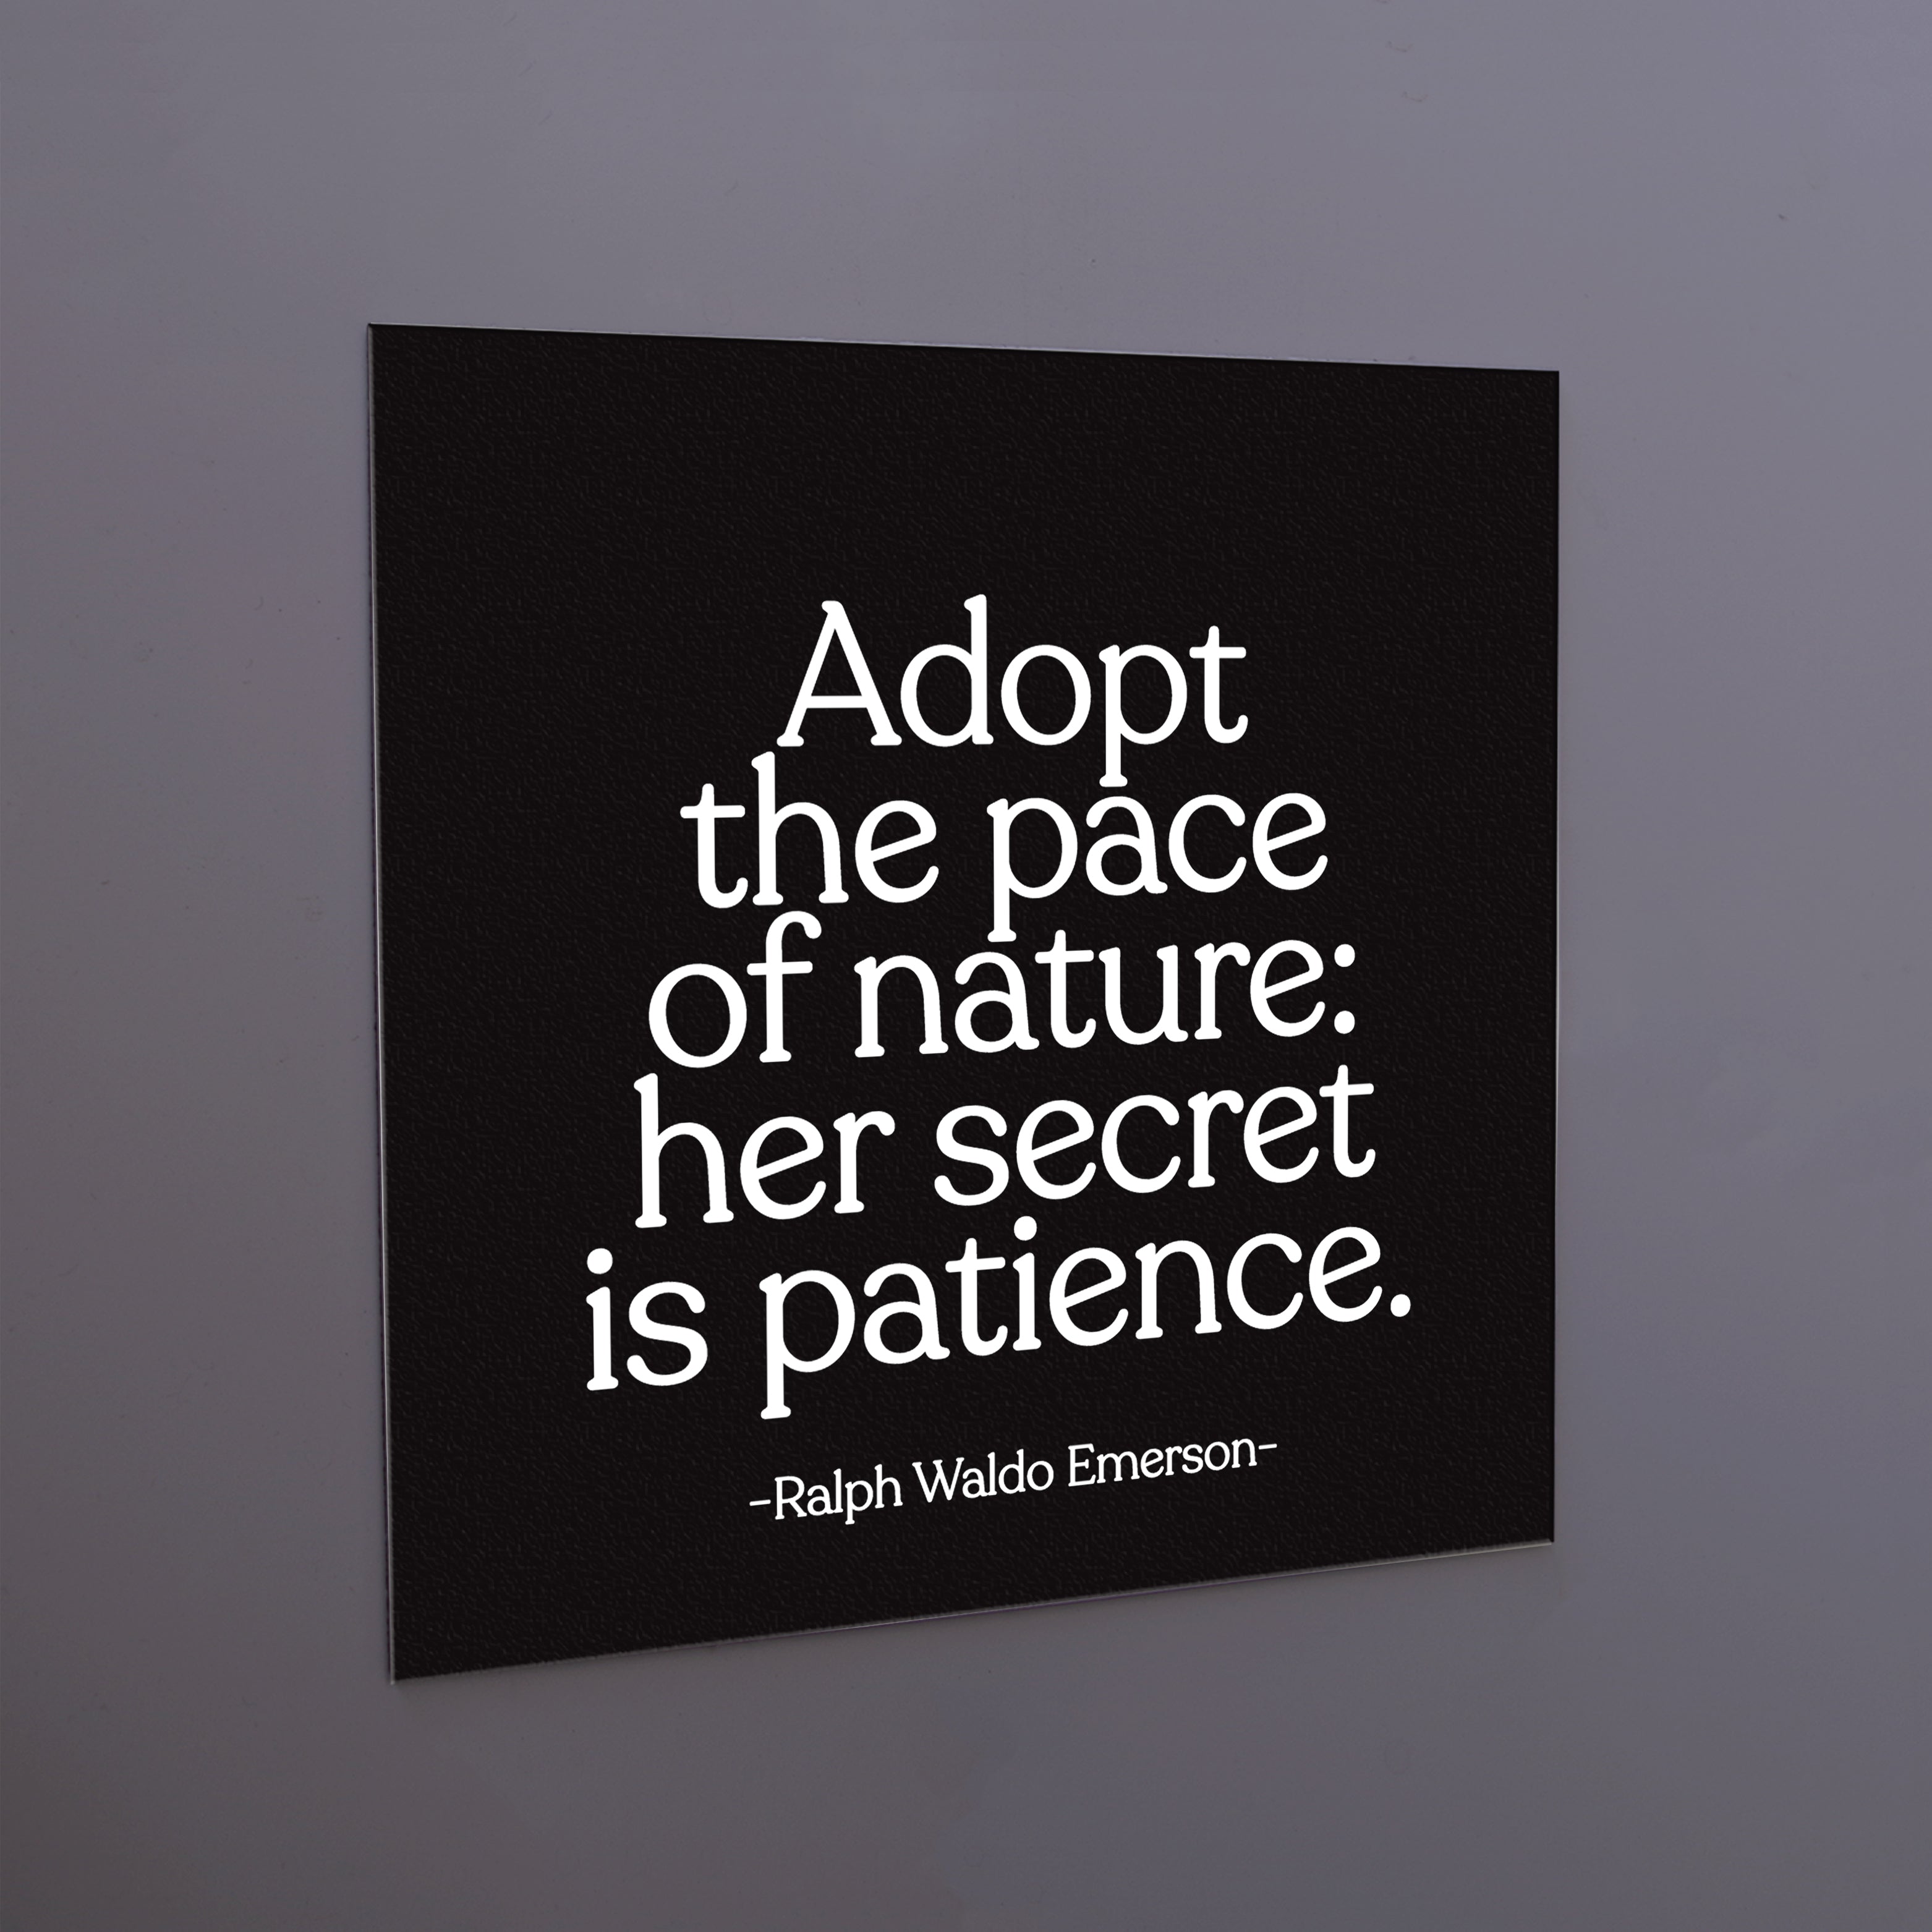 "adopt the pace of nature" magnet